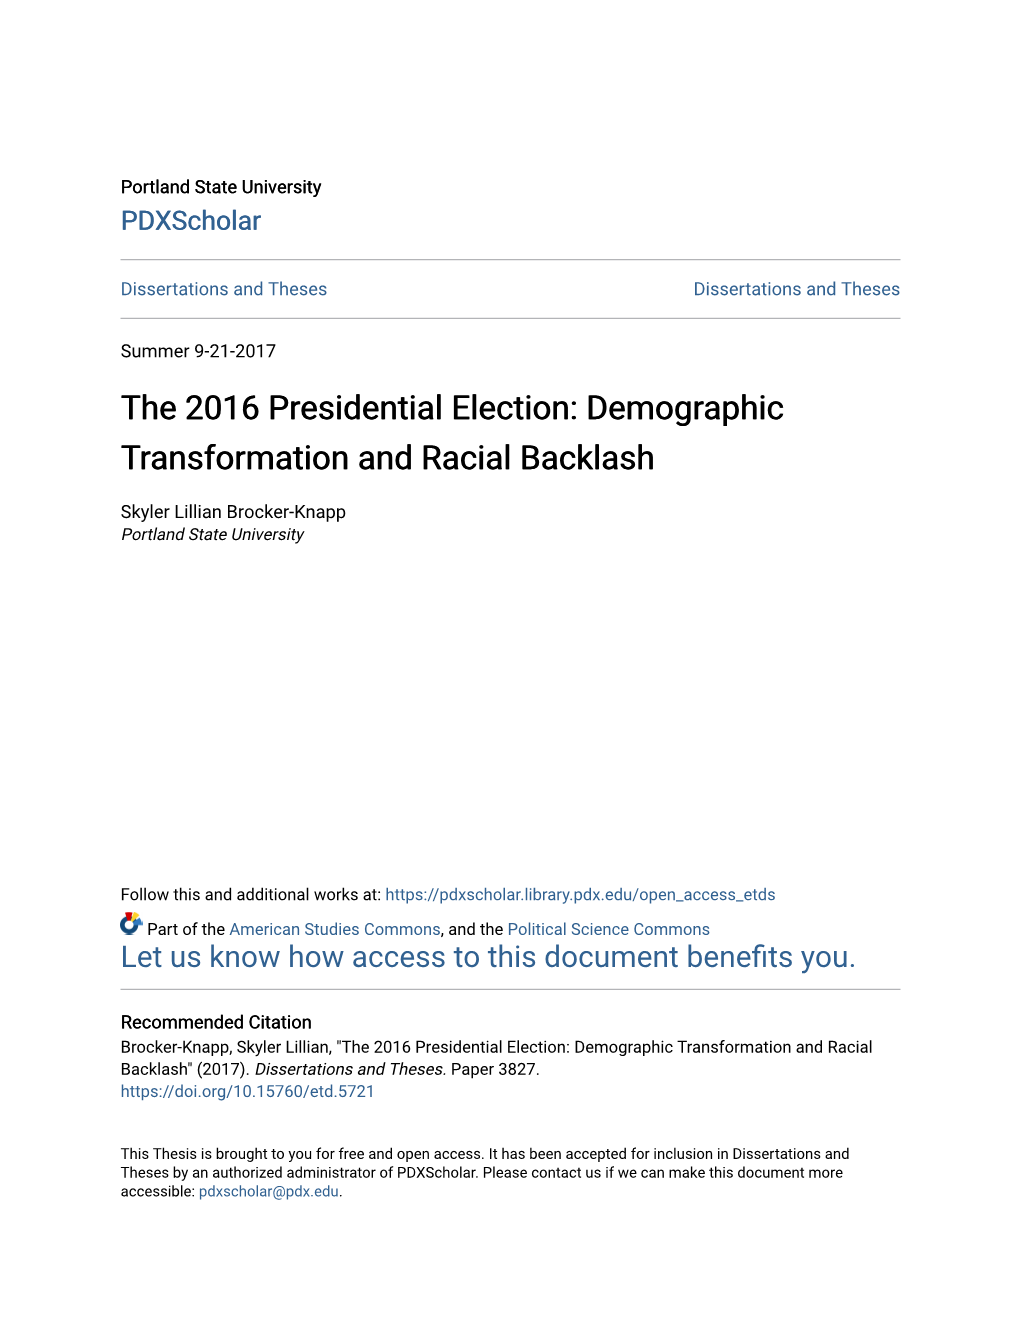 The 2016 Presidential Election: Demographic Transformation and Racial Backlash